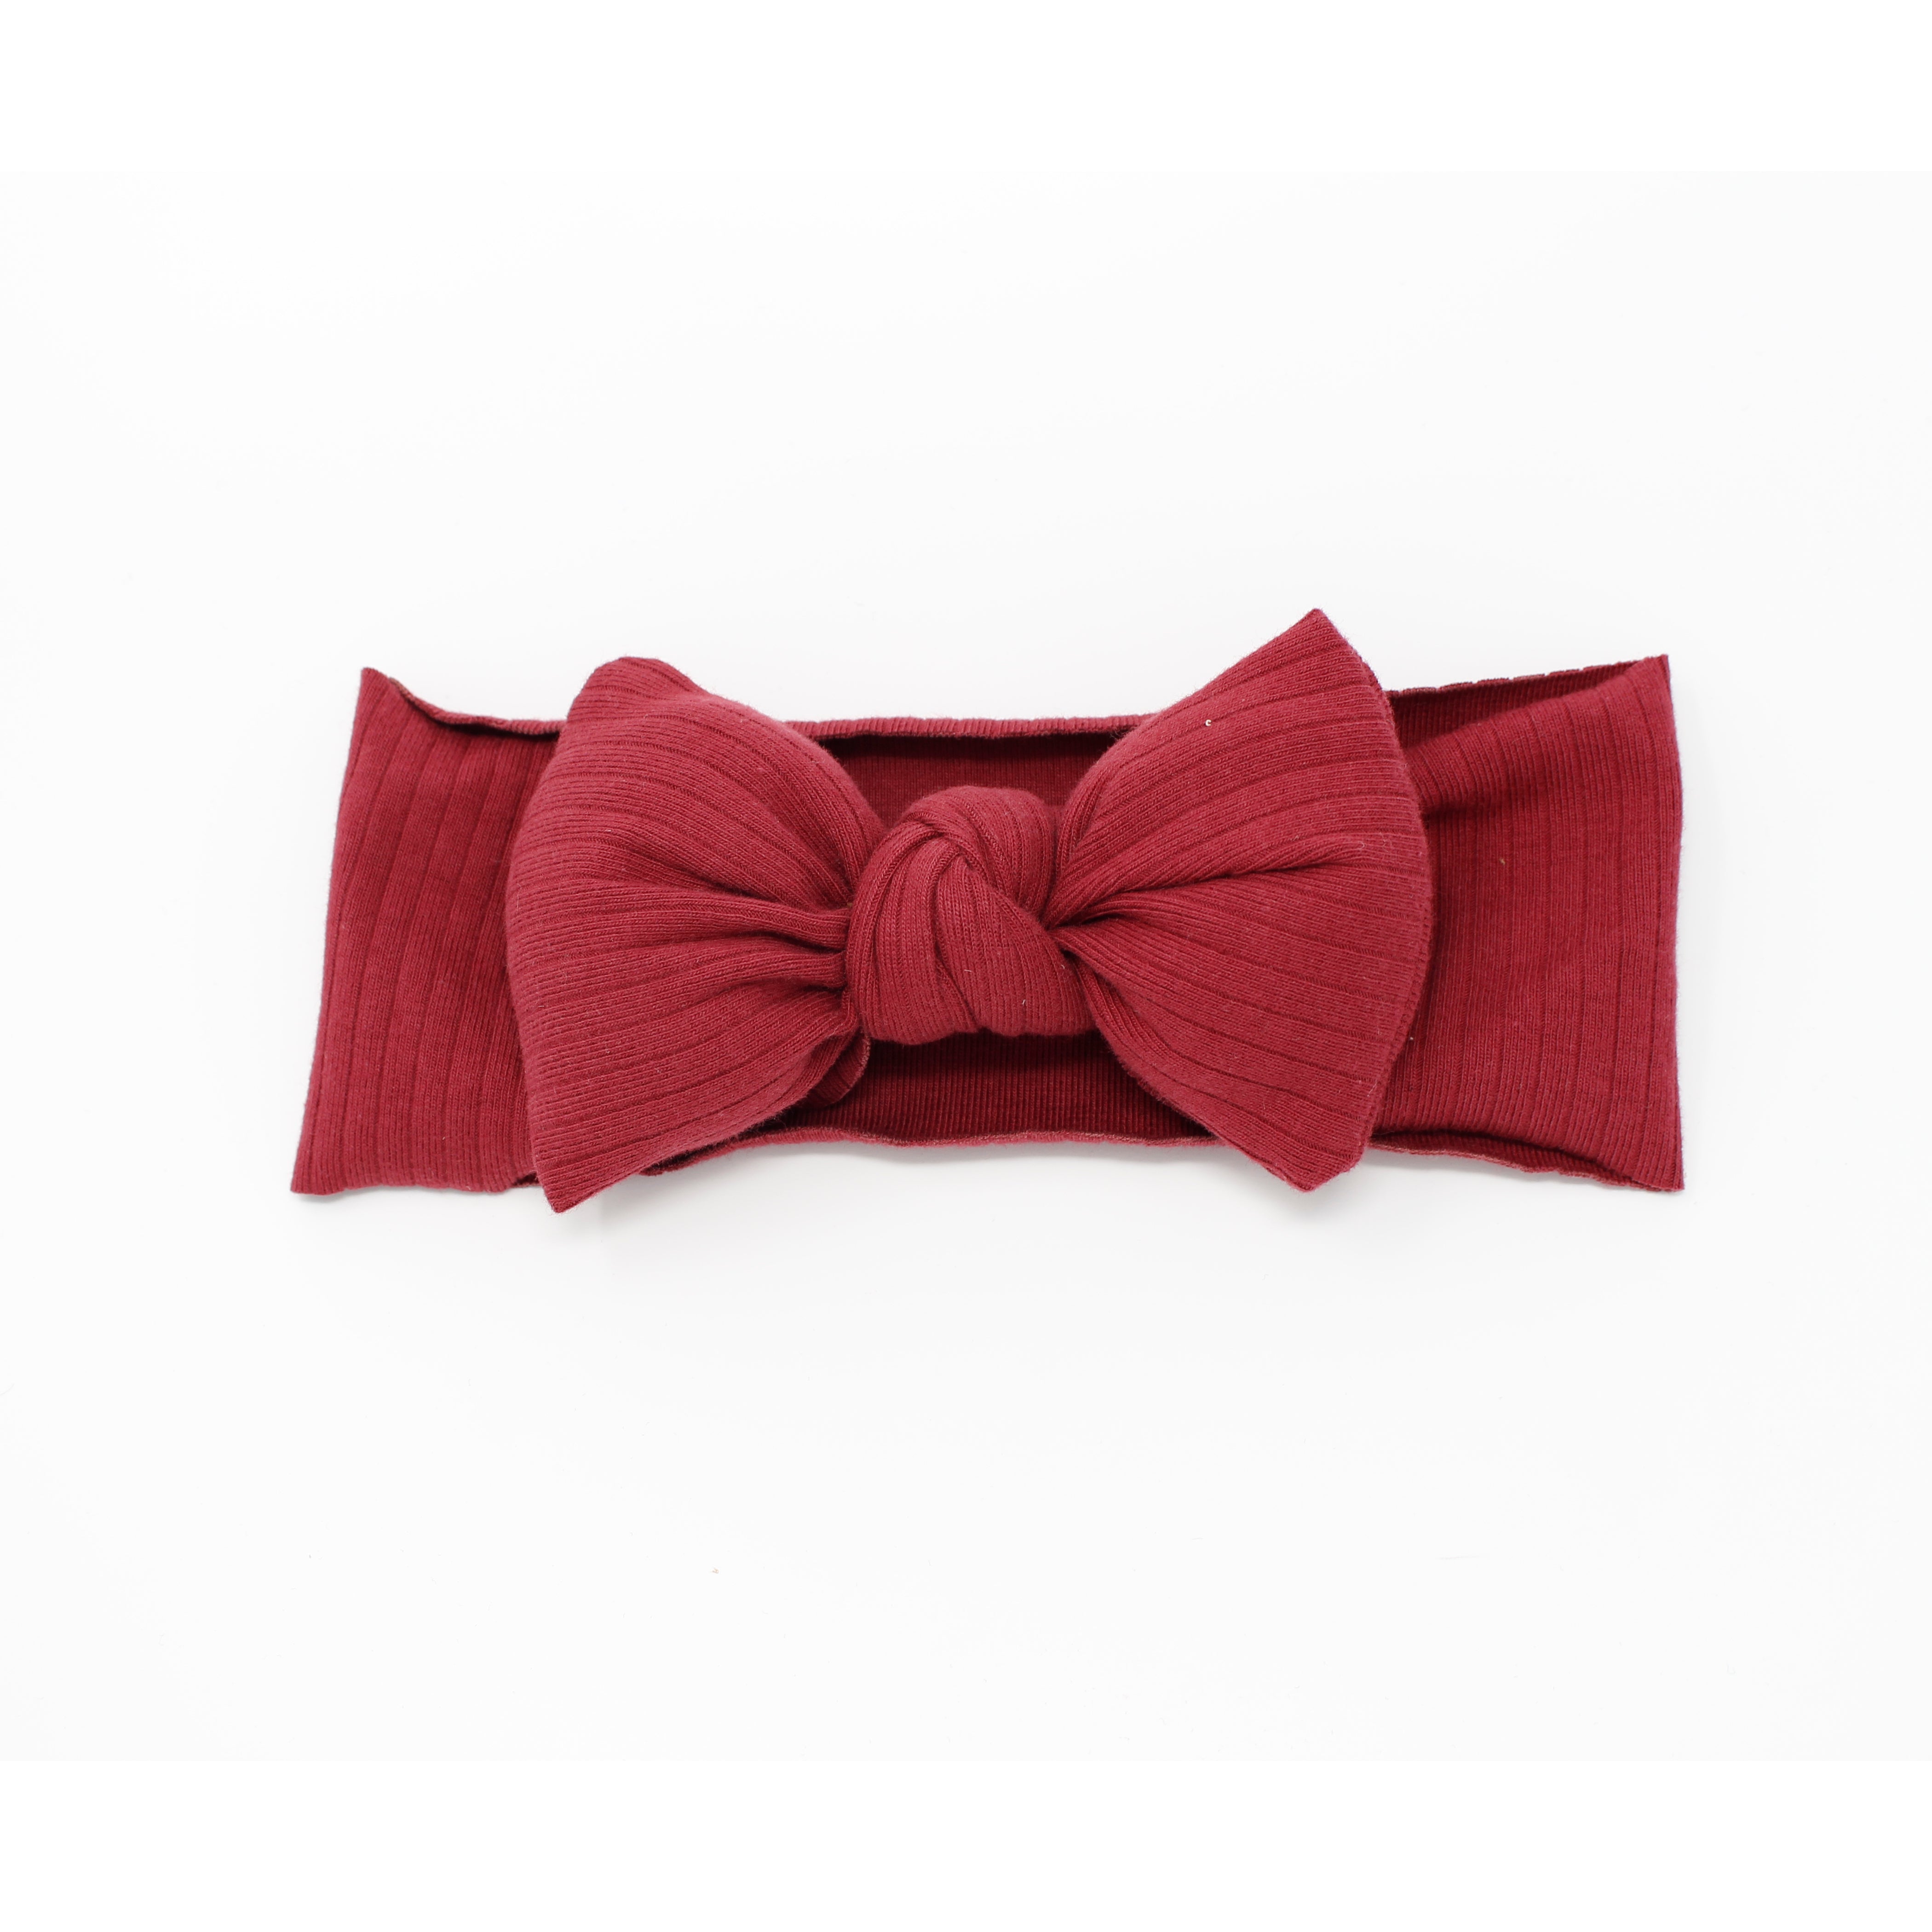 Ribbed Puffed Bow Baby Band